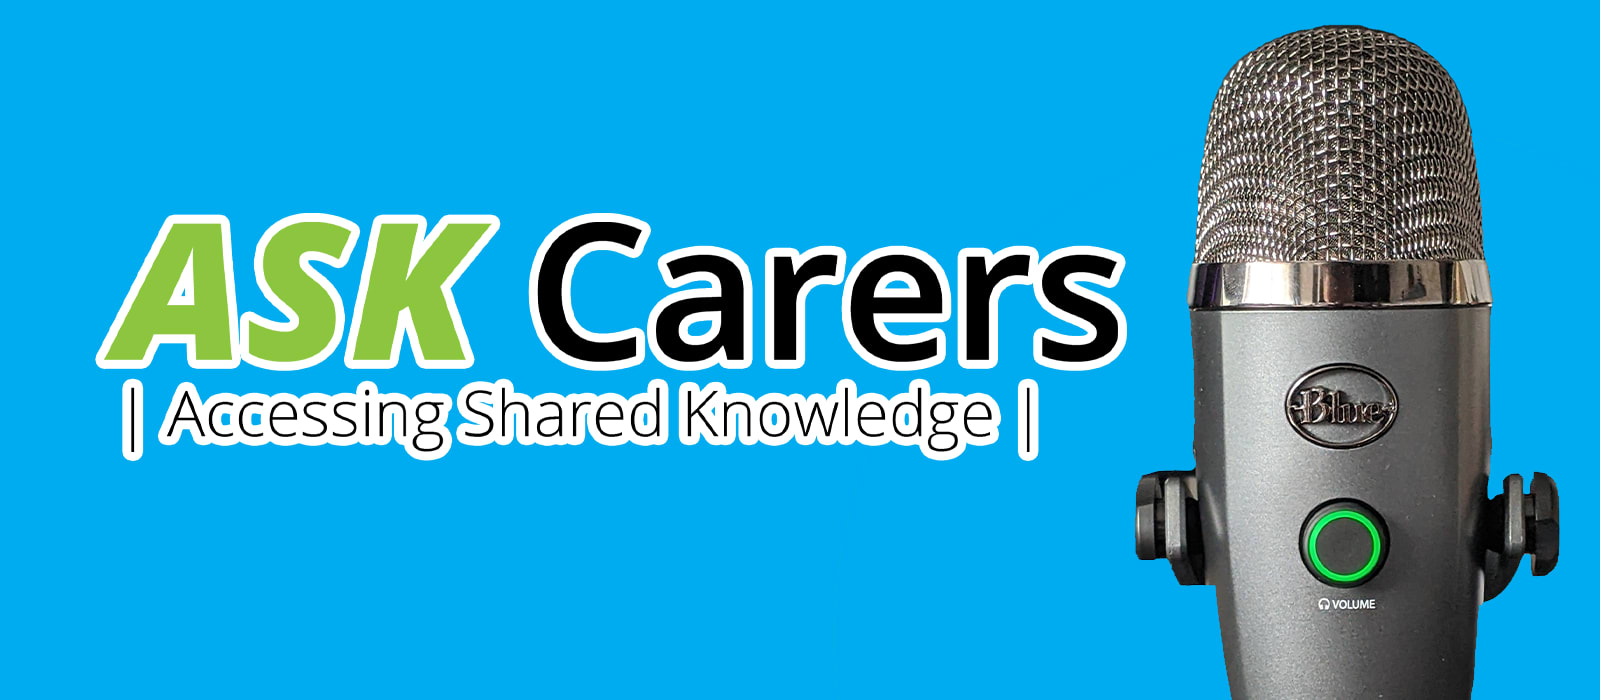 ASK Carers